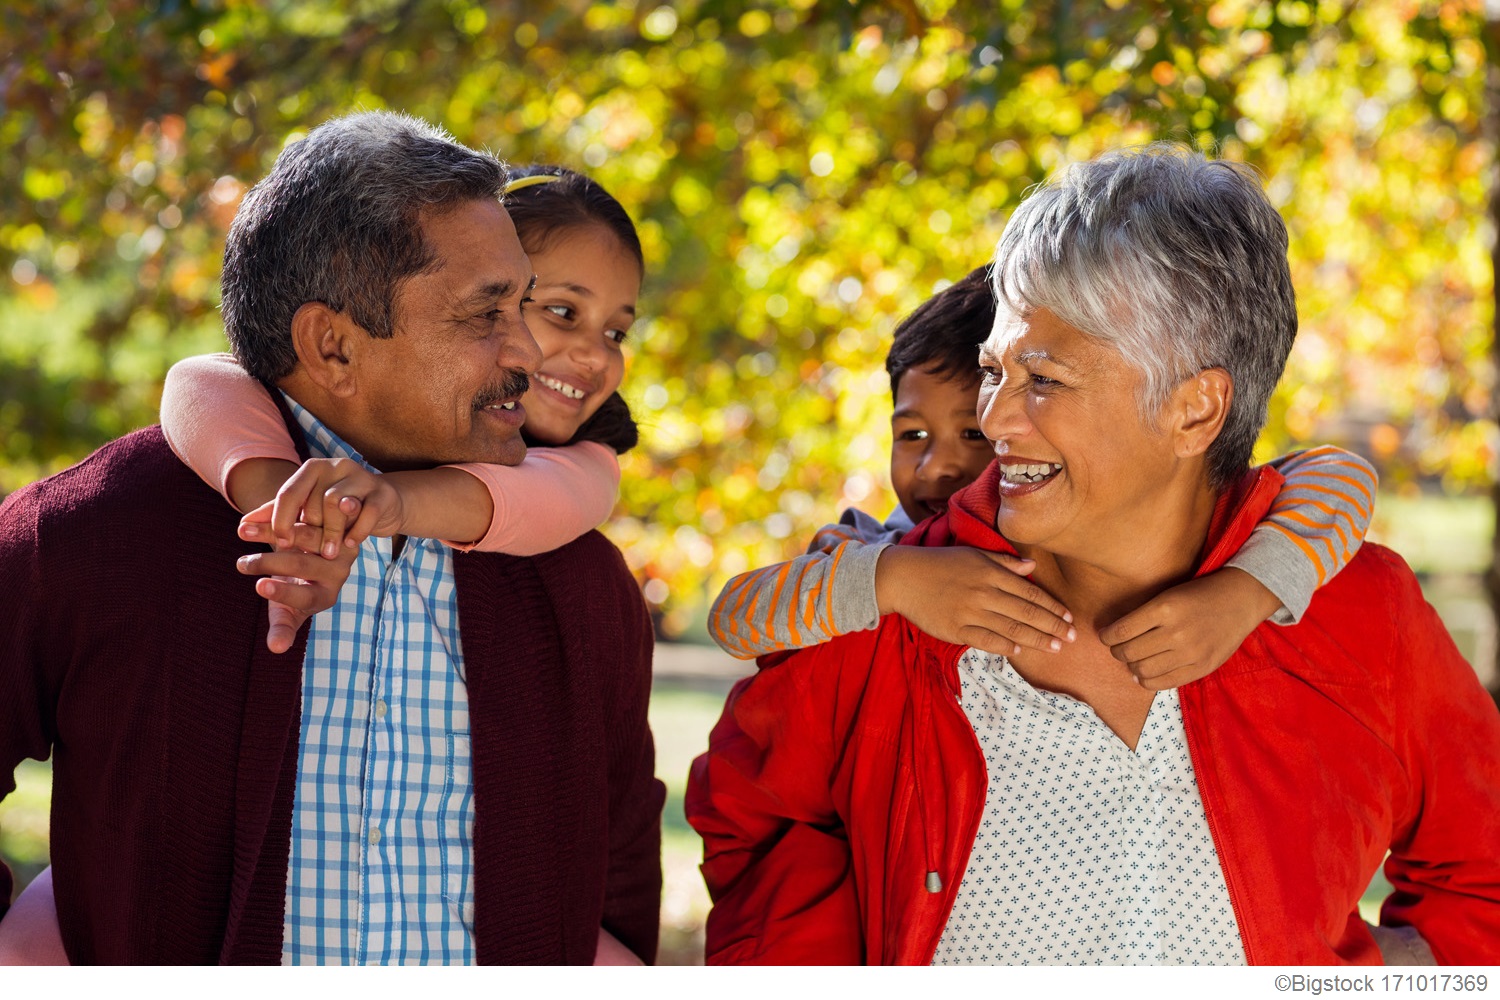 grandparent-health-and-family-well-being